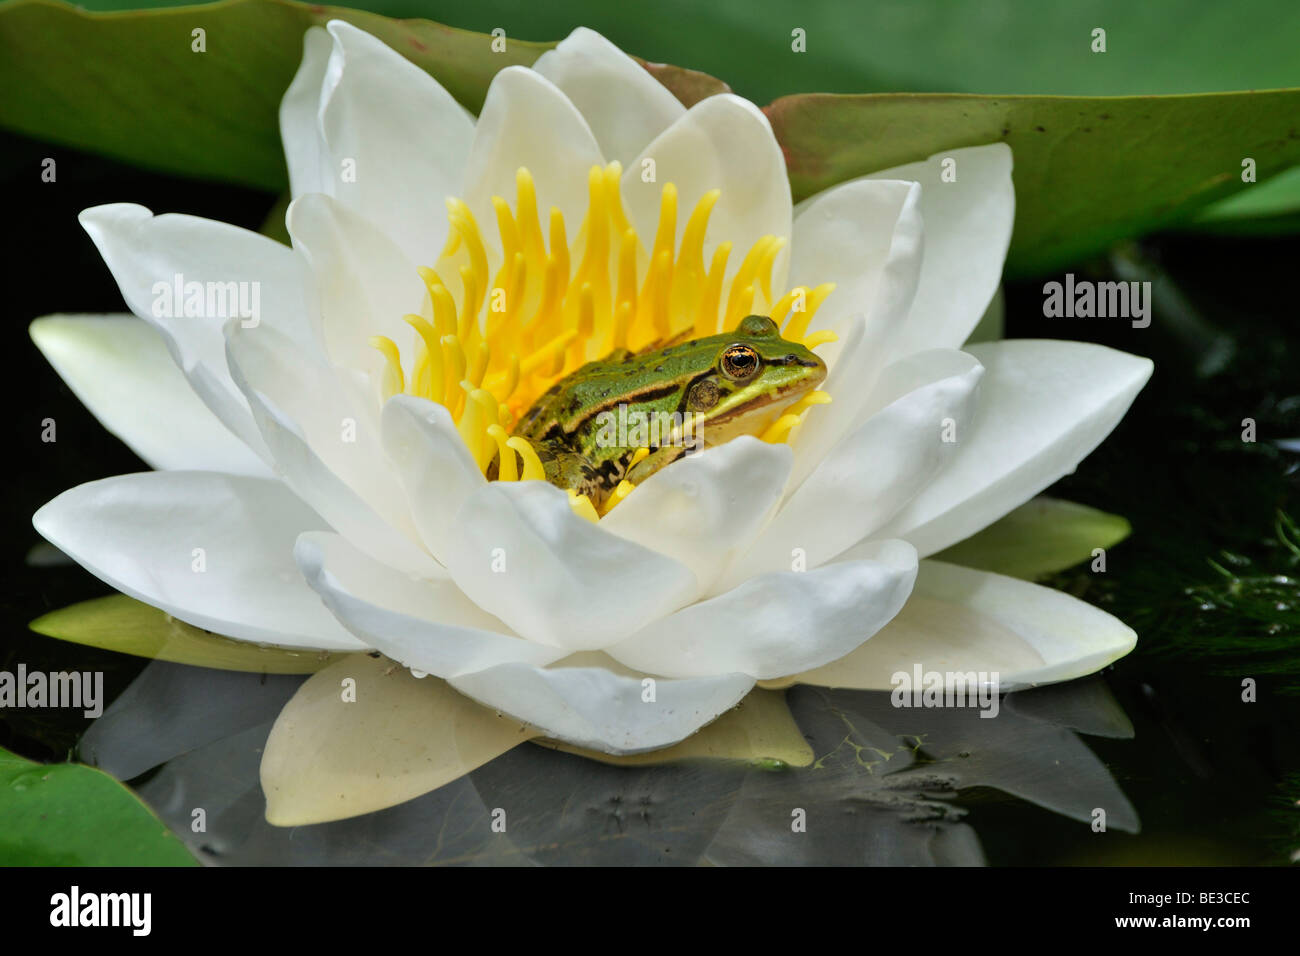 Water Frog (Rana esculenta, Pelophylax kl. Esculentus) on blossoming Water Lily (Nymphaea) Stock Photo